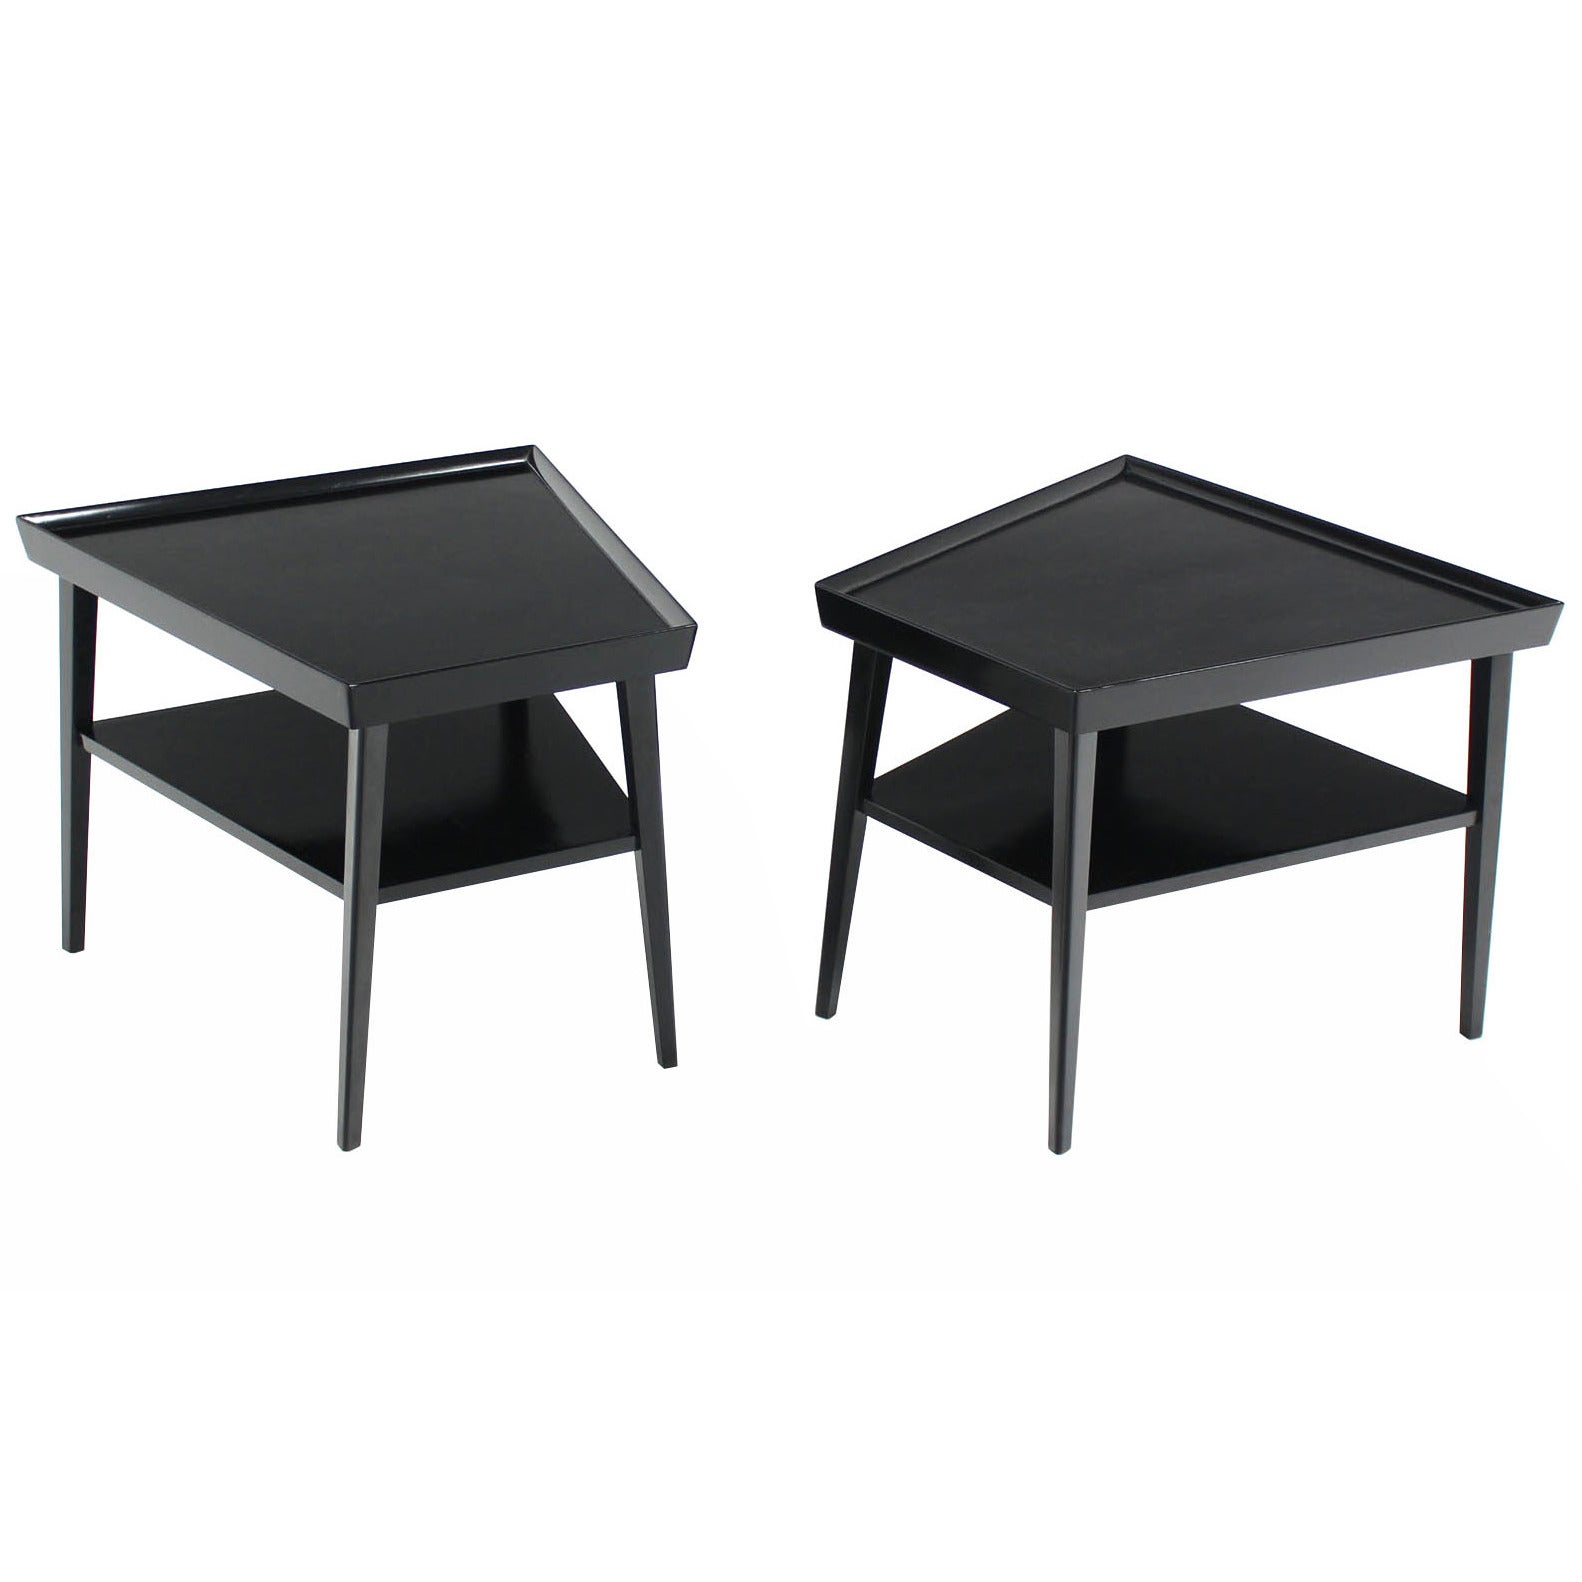 Pair of Black Lacquer Trapezoid Shape End Tables